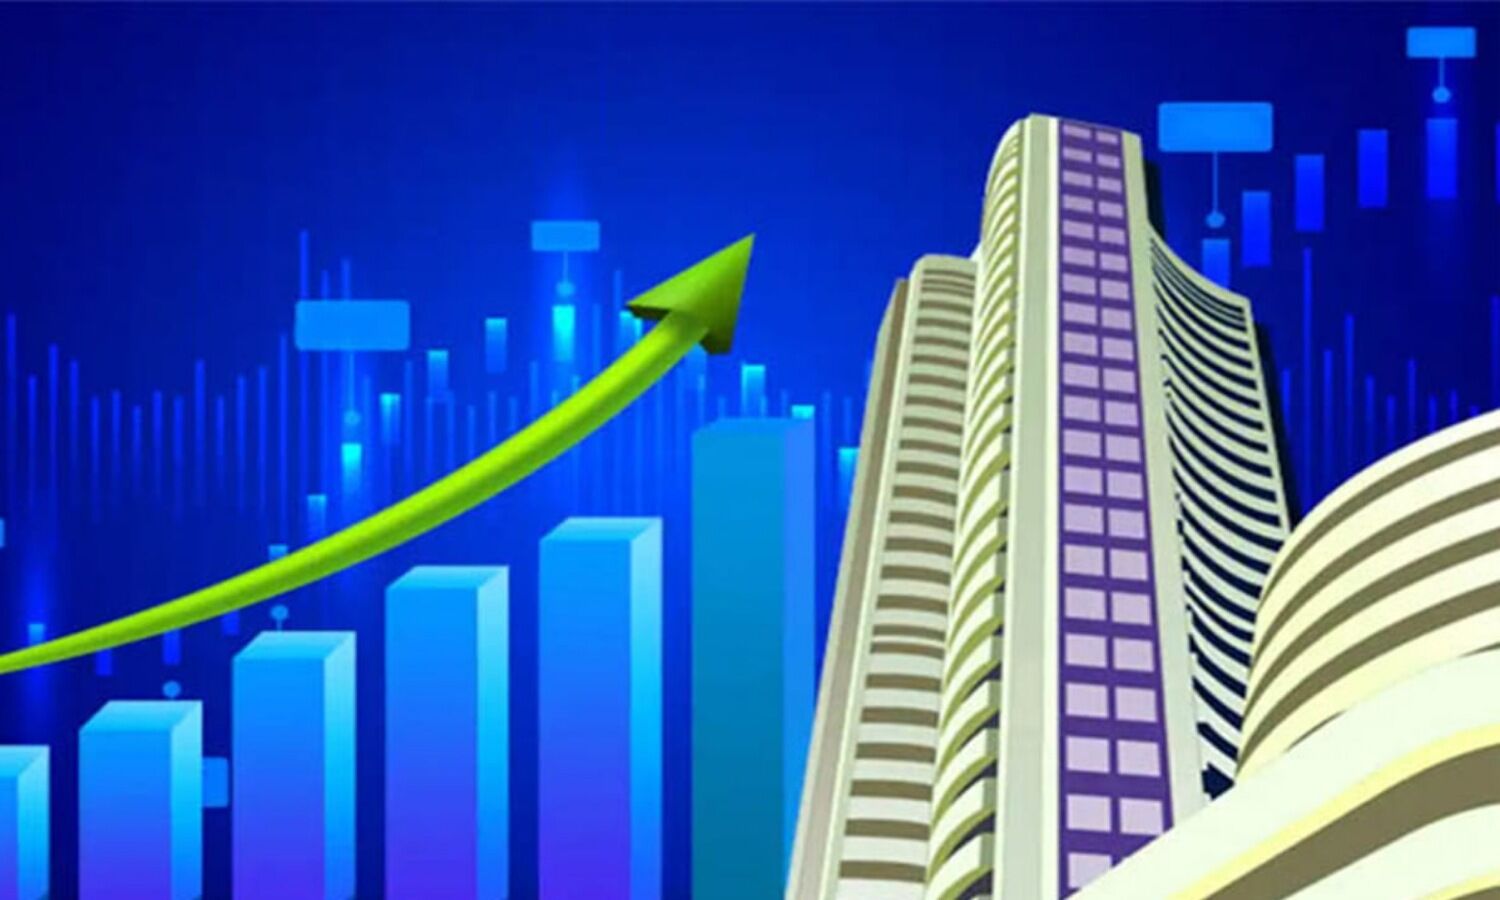 Share Market Today: Strong buying in the stock market, Sensex rises 579 points